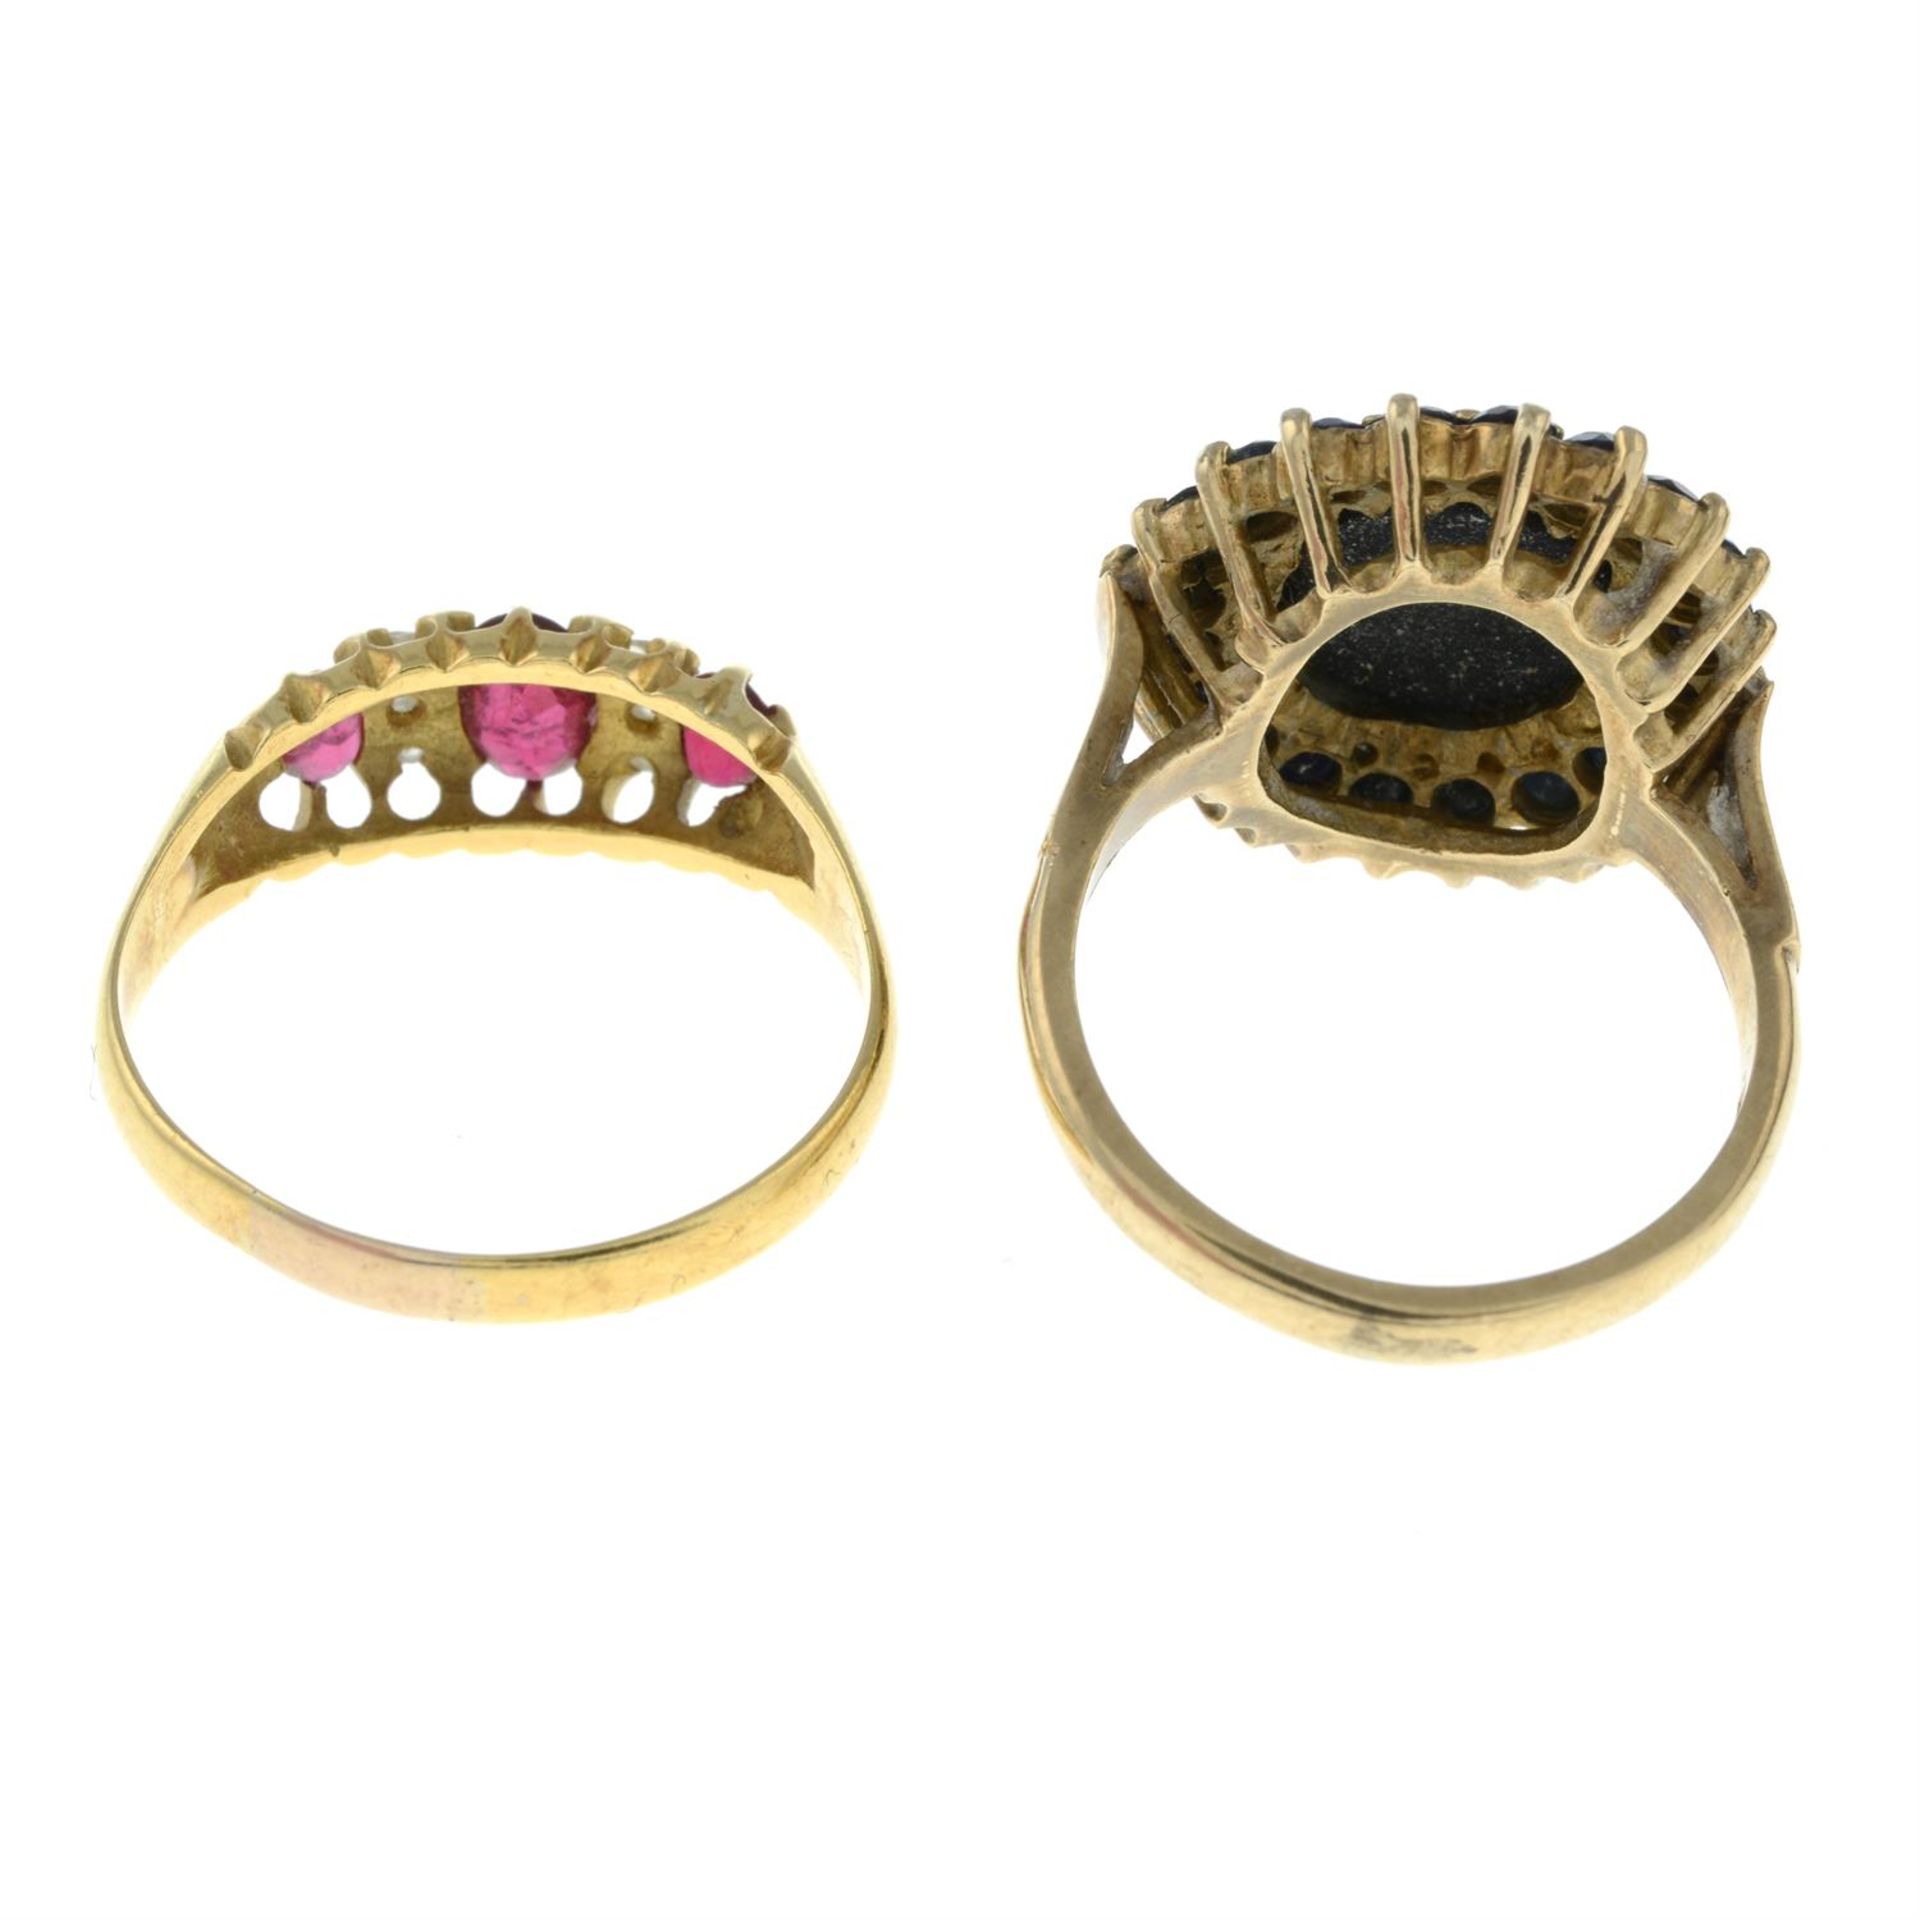 An Edwardian 18ct gold garnet-topped-doublet and diamond ring, and a later 9ct gold opal triplet - Bild 2 aus 2